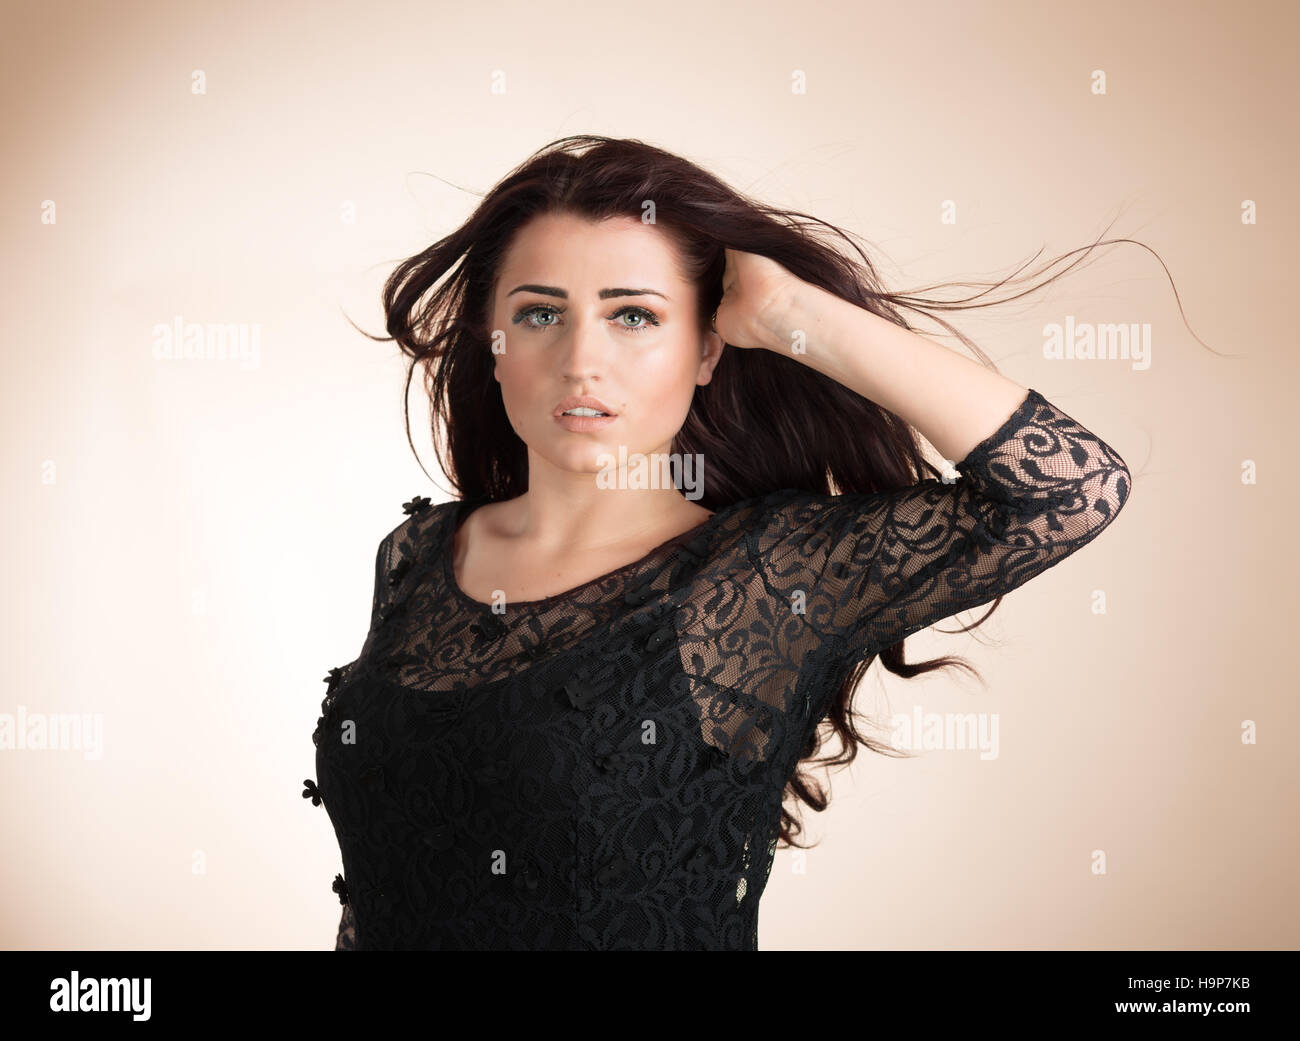 Beauty portrait of young healthy woman with hair blowing Stock Photo